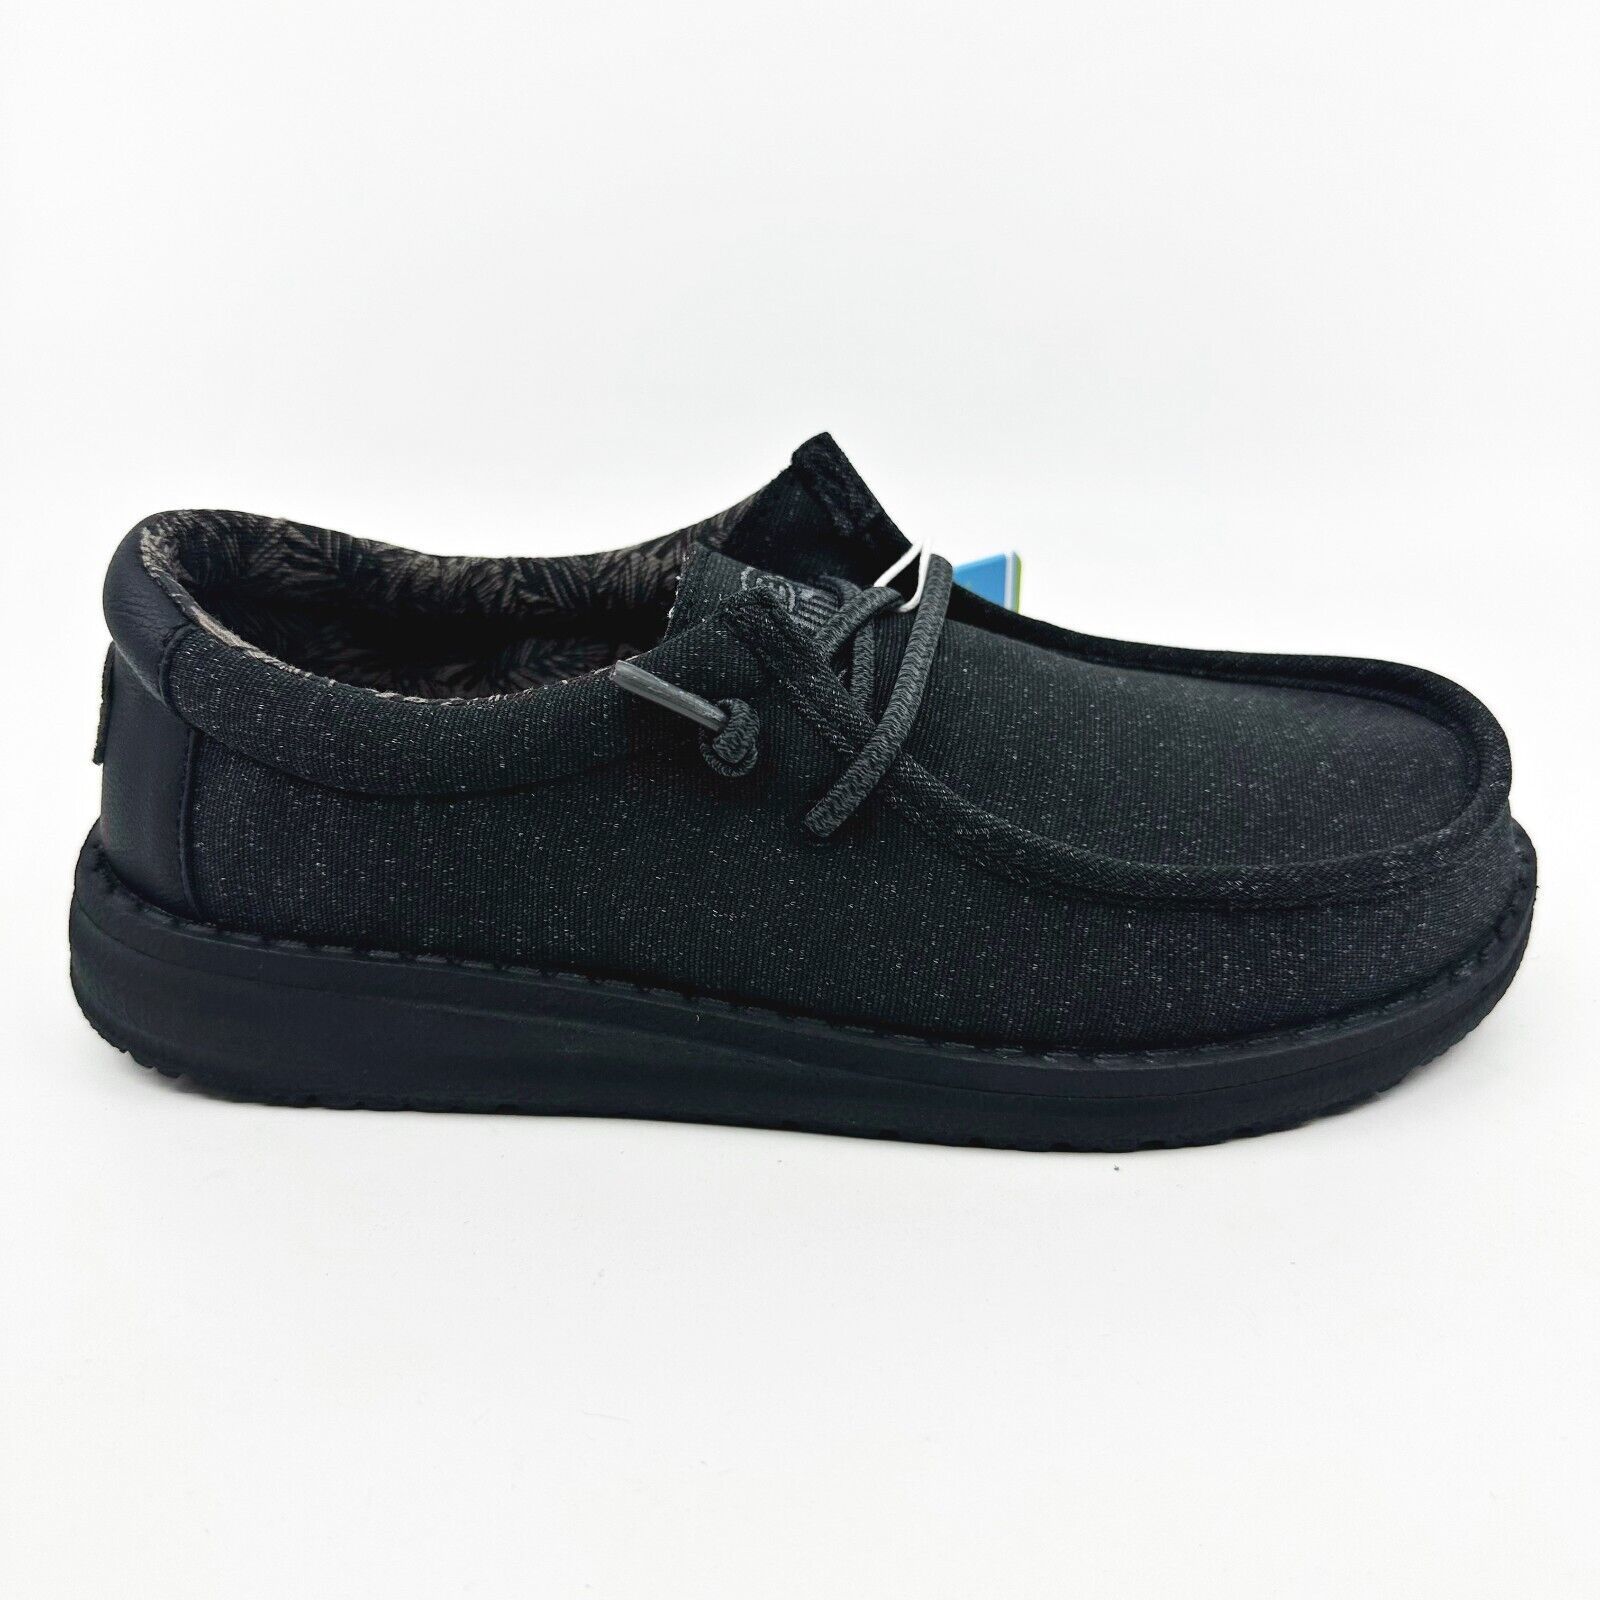 Primary image for Hey Dude Wally Youth Basic Black Kids Comfort Slip On Shoes